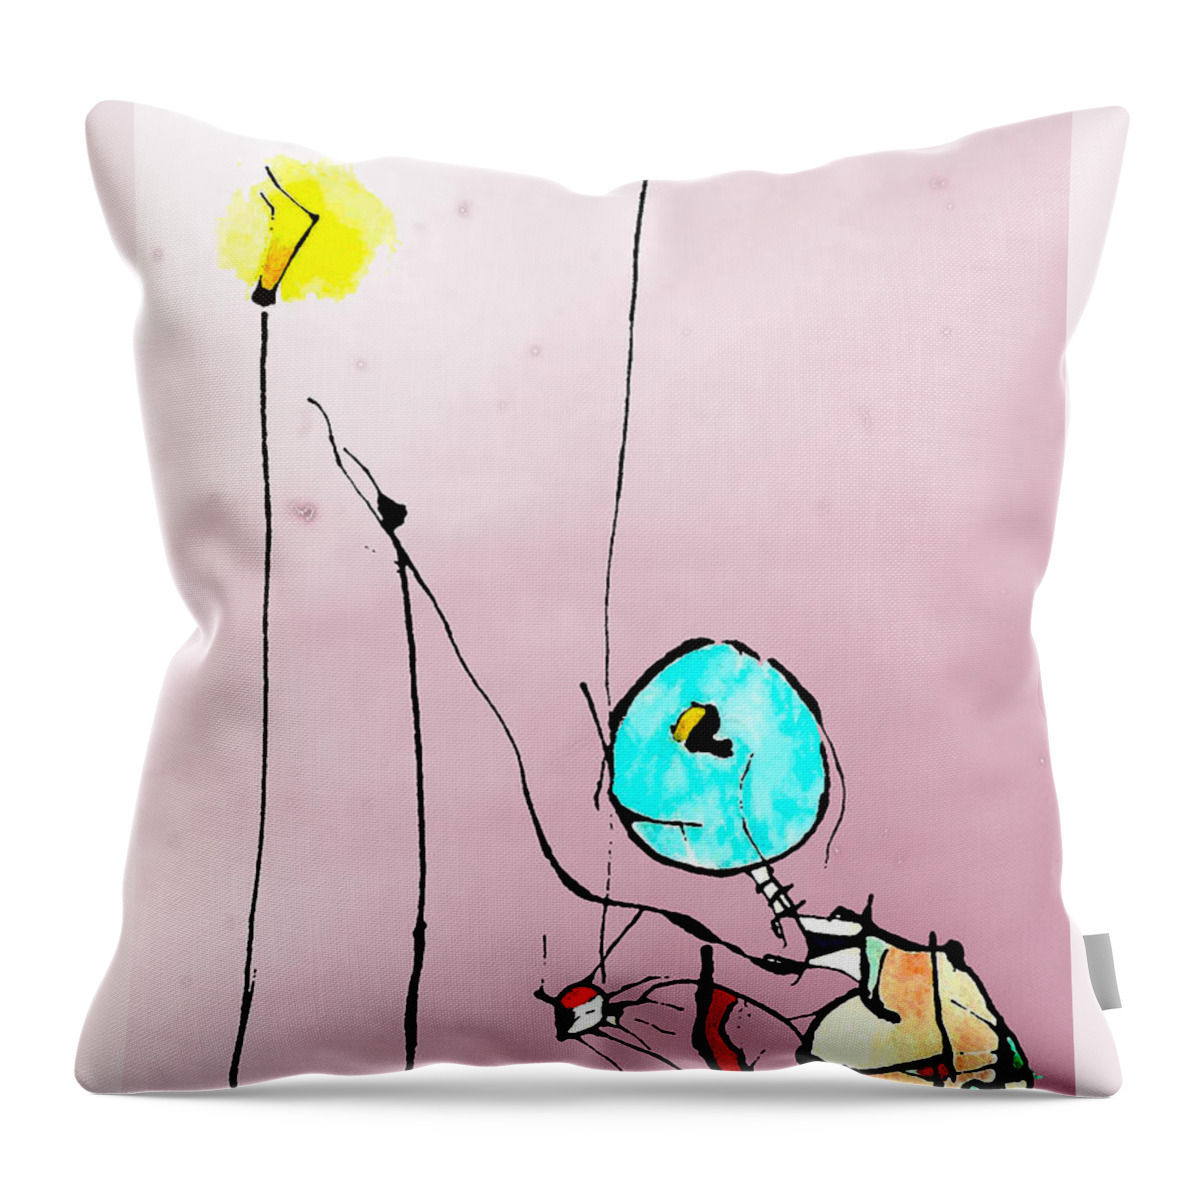 Ink Throw Pillow featuring the mixed media Lamplight by Jeff Barrett